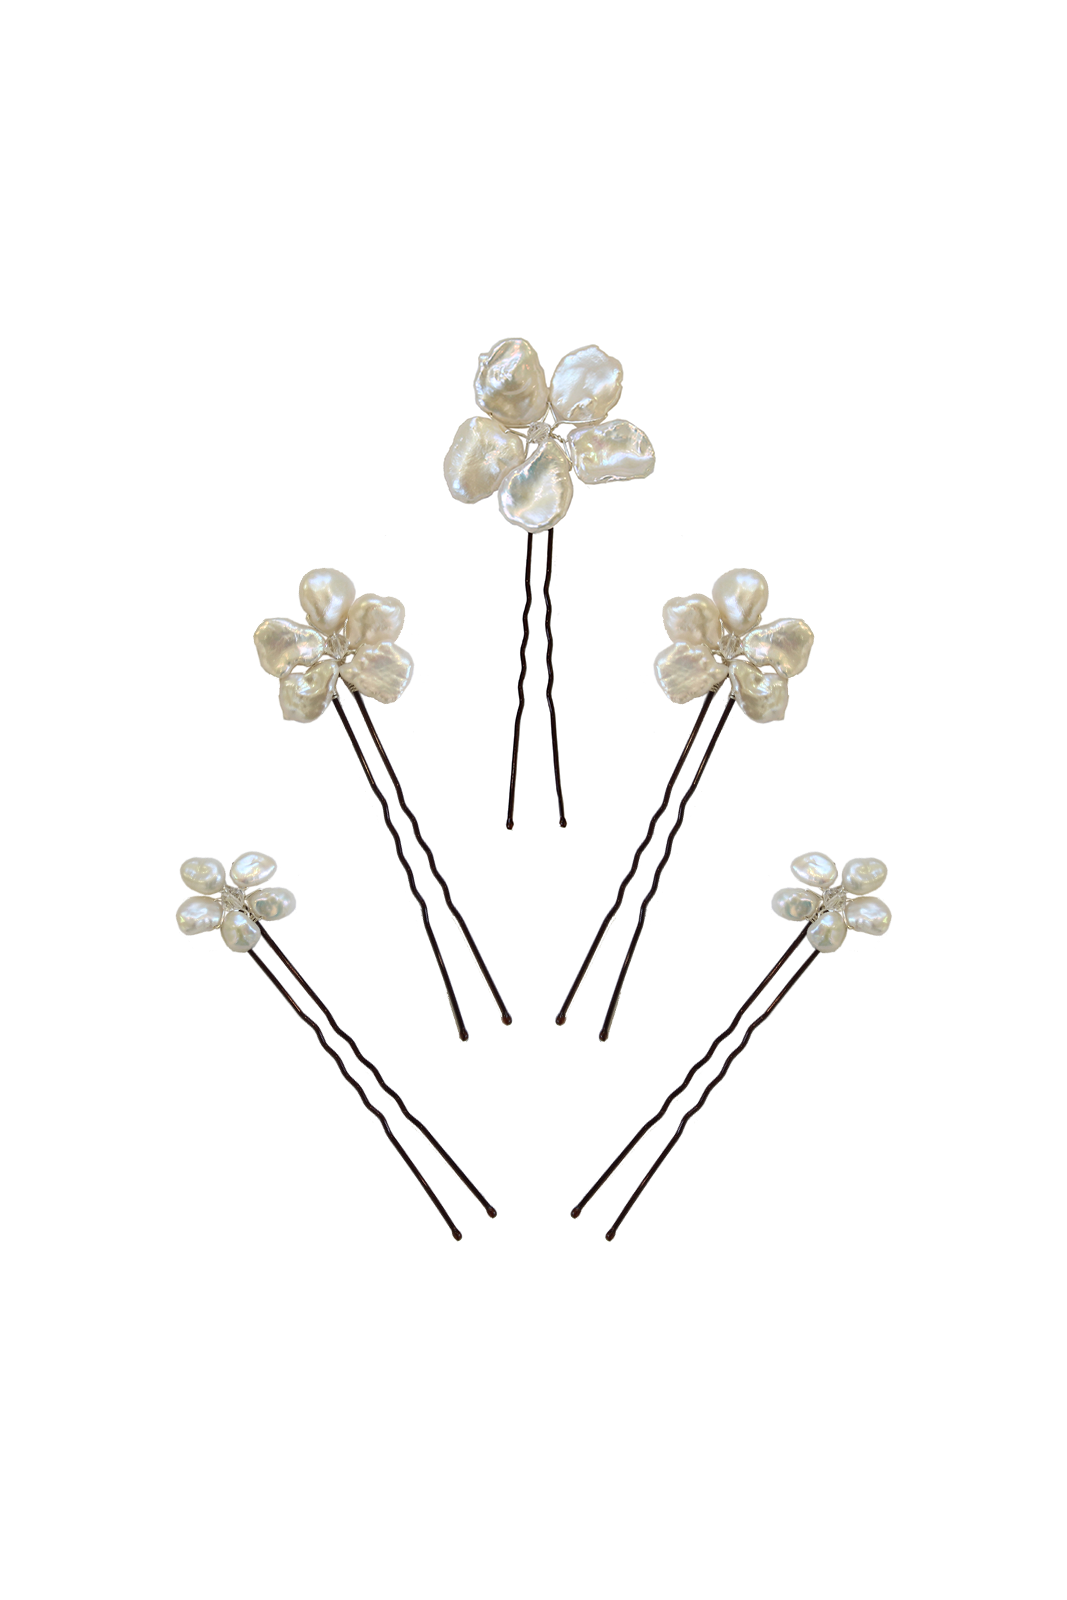 Blossom Hairpins